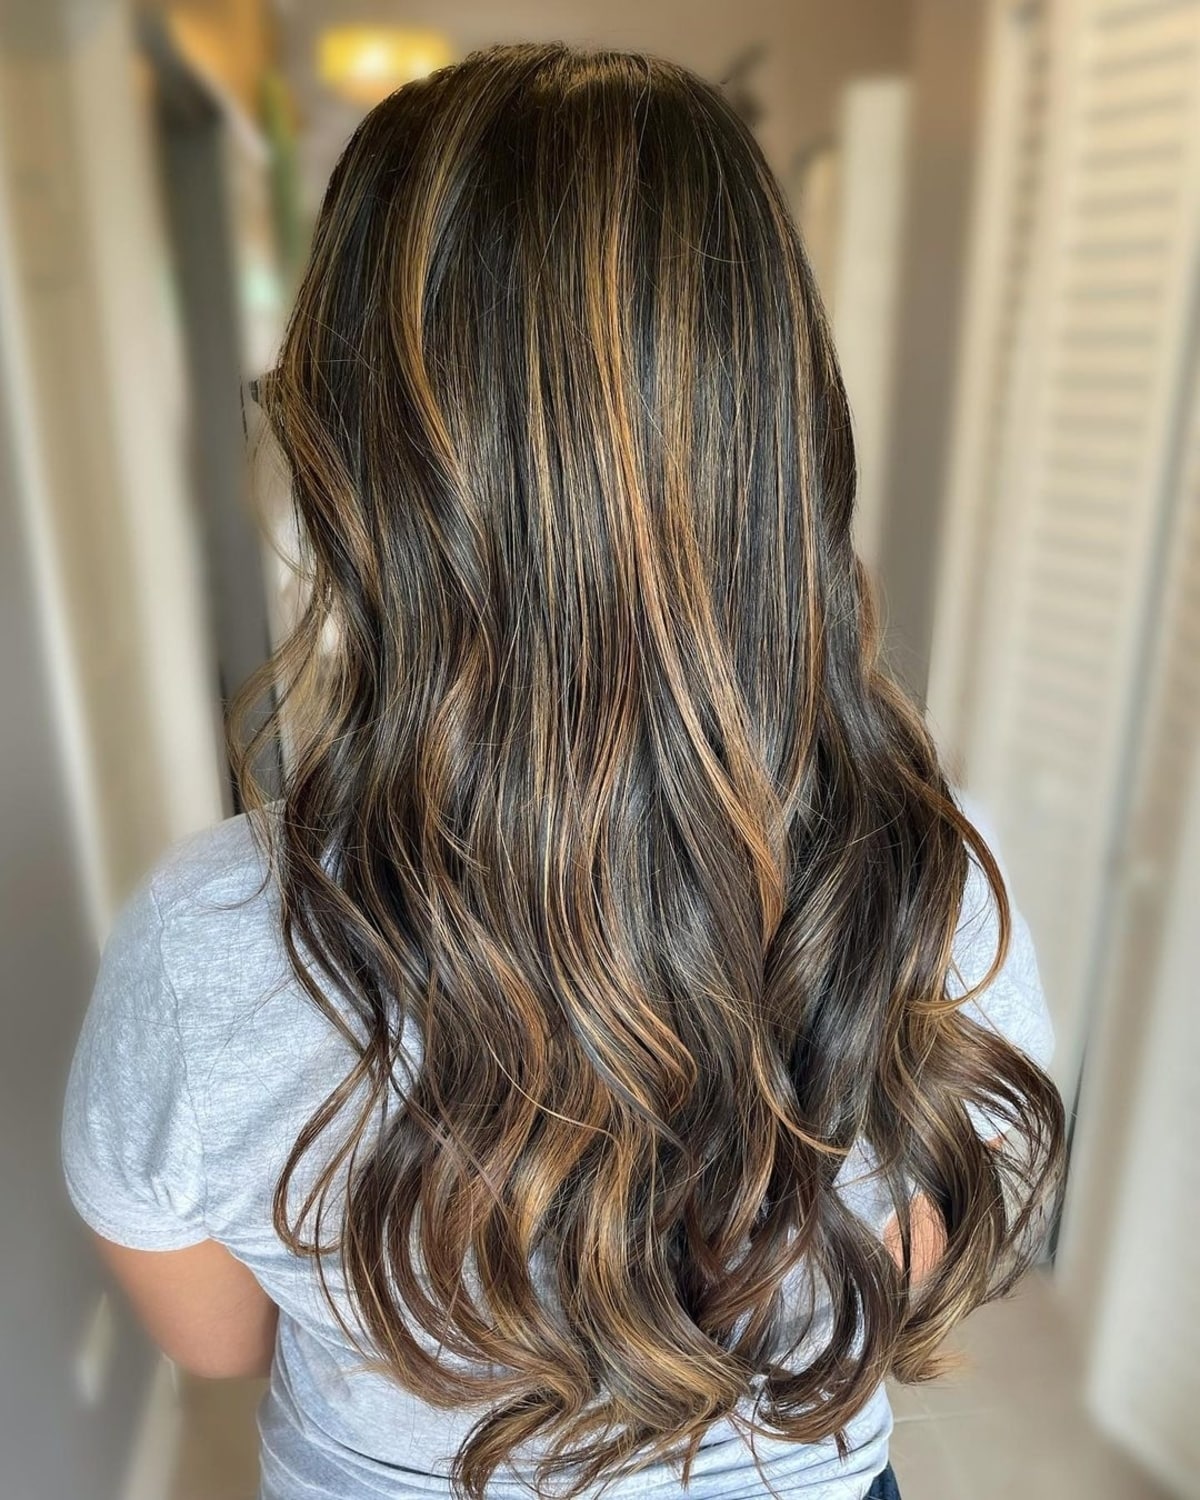 Brown hair with caramel highlights